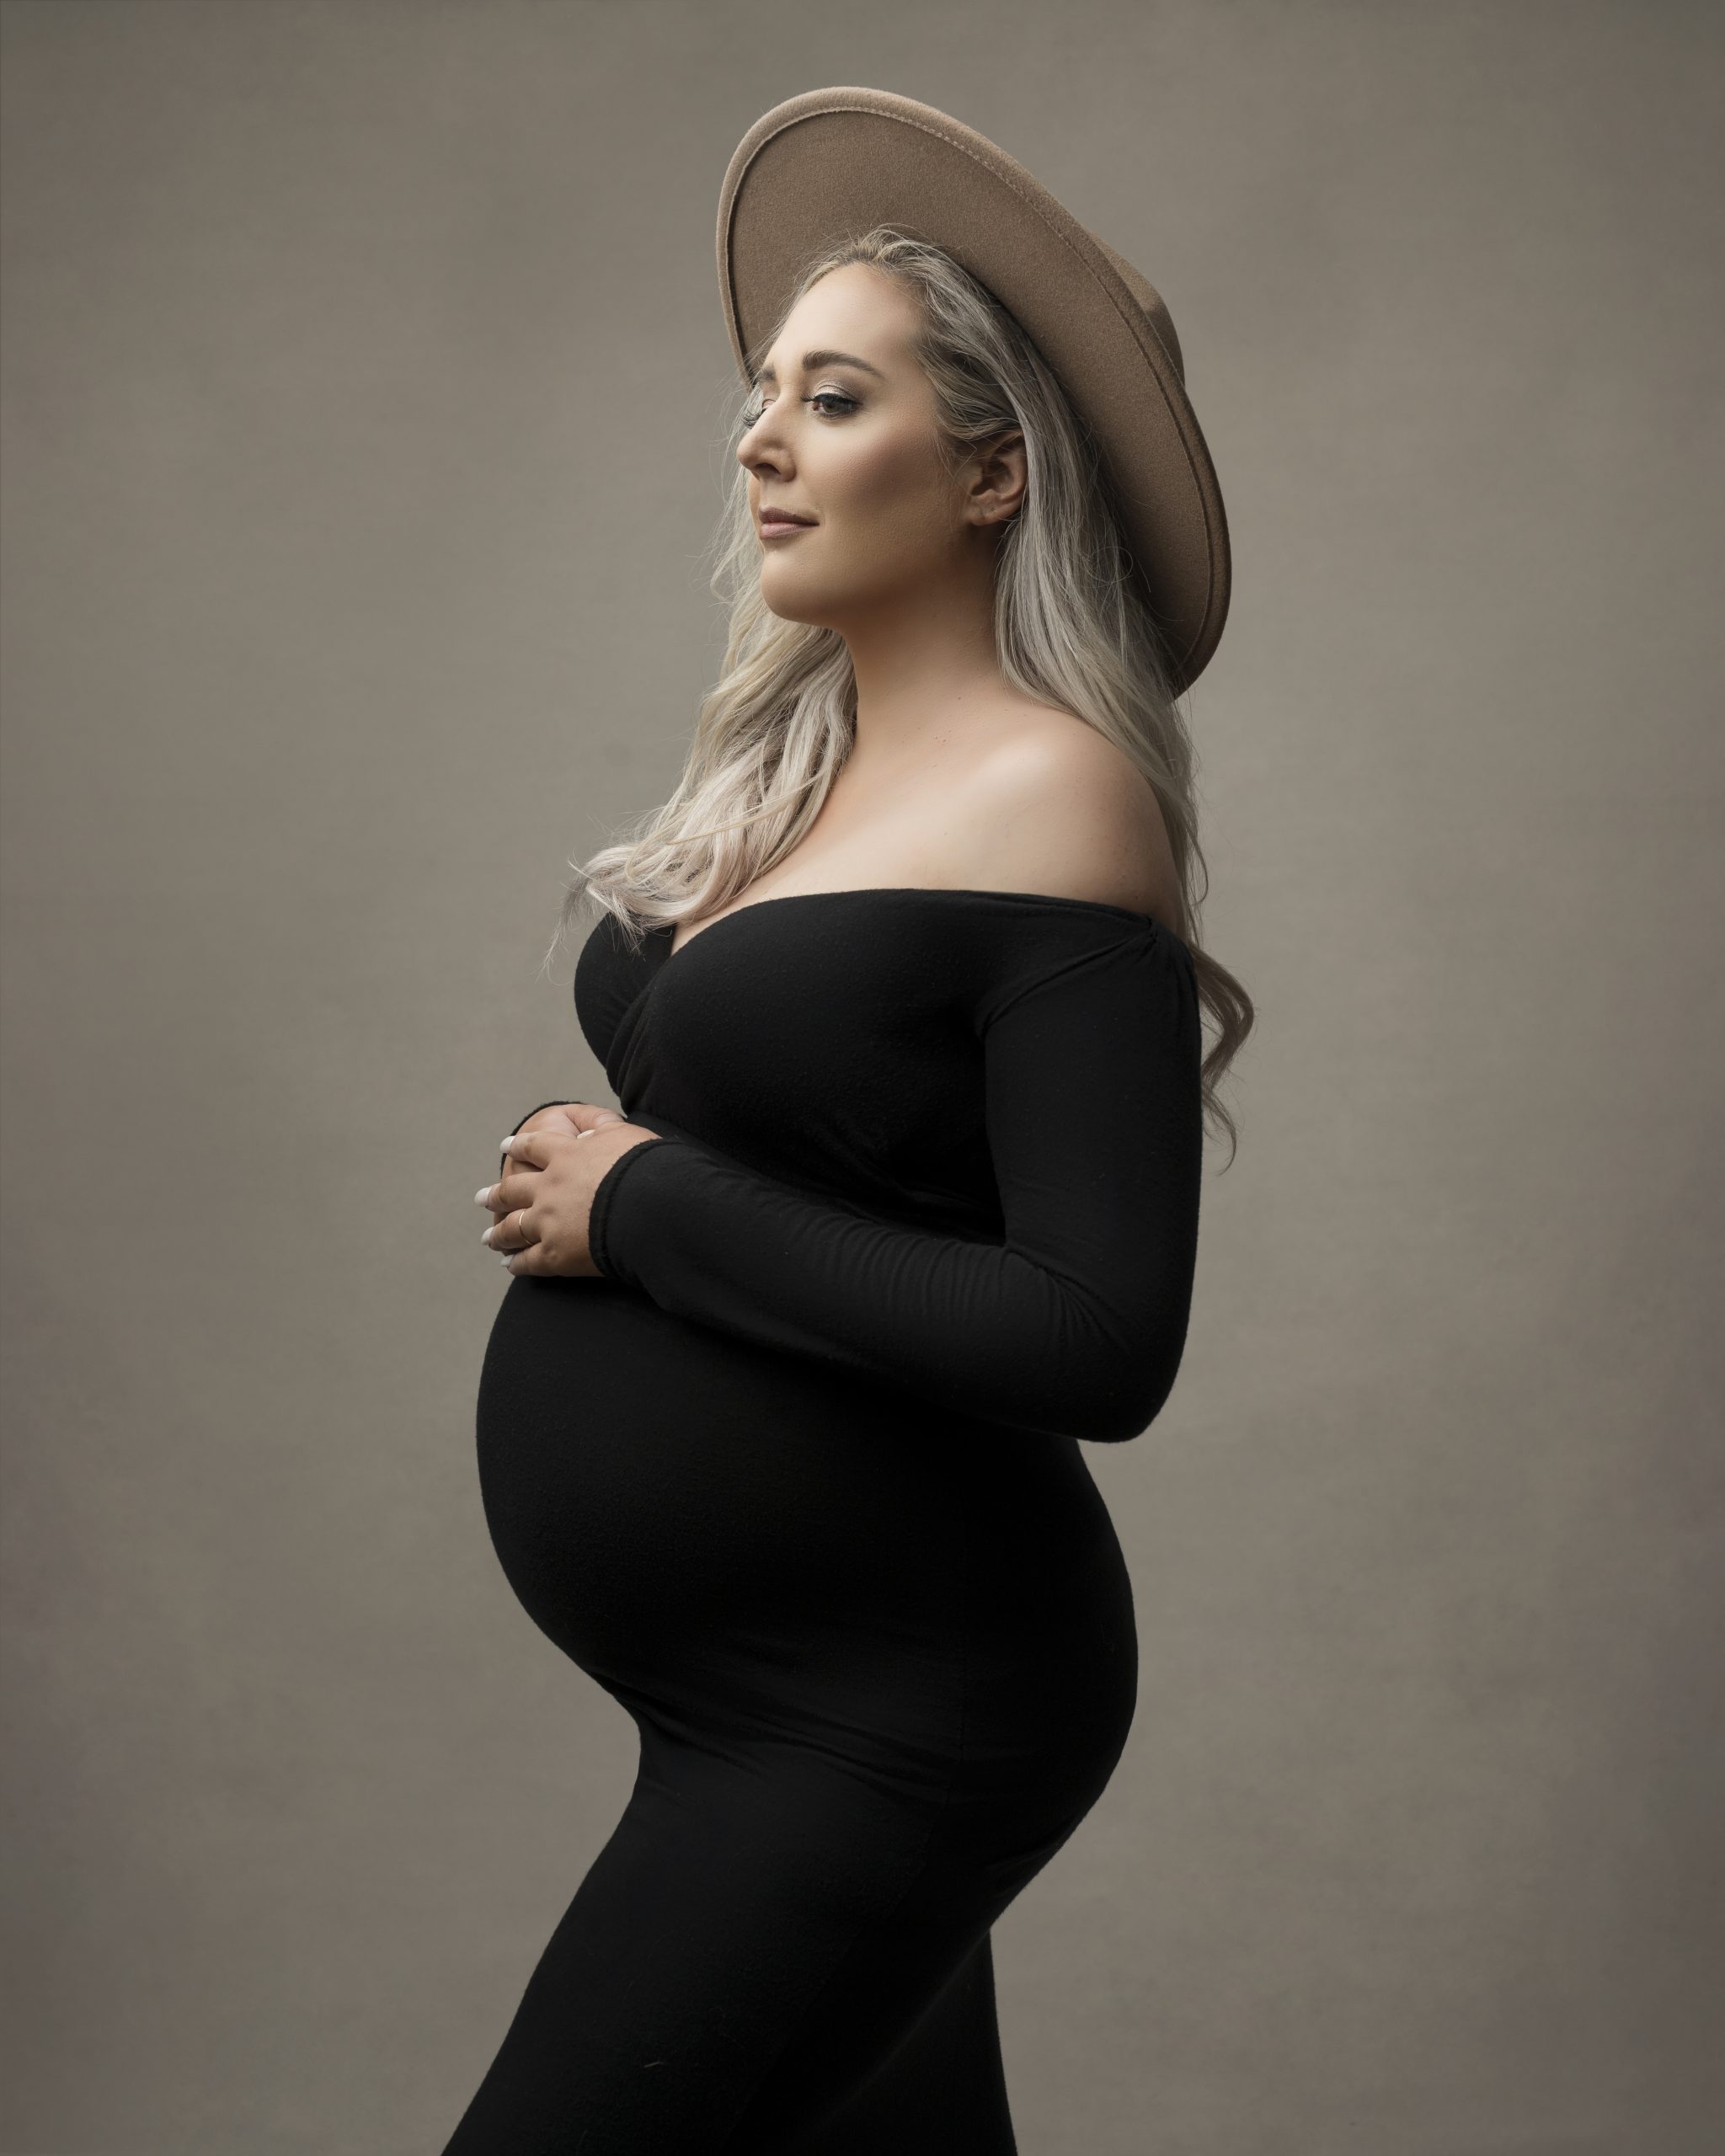 Allison wearing a black dress and beige hat while holding her baby bump.